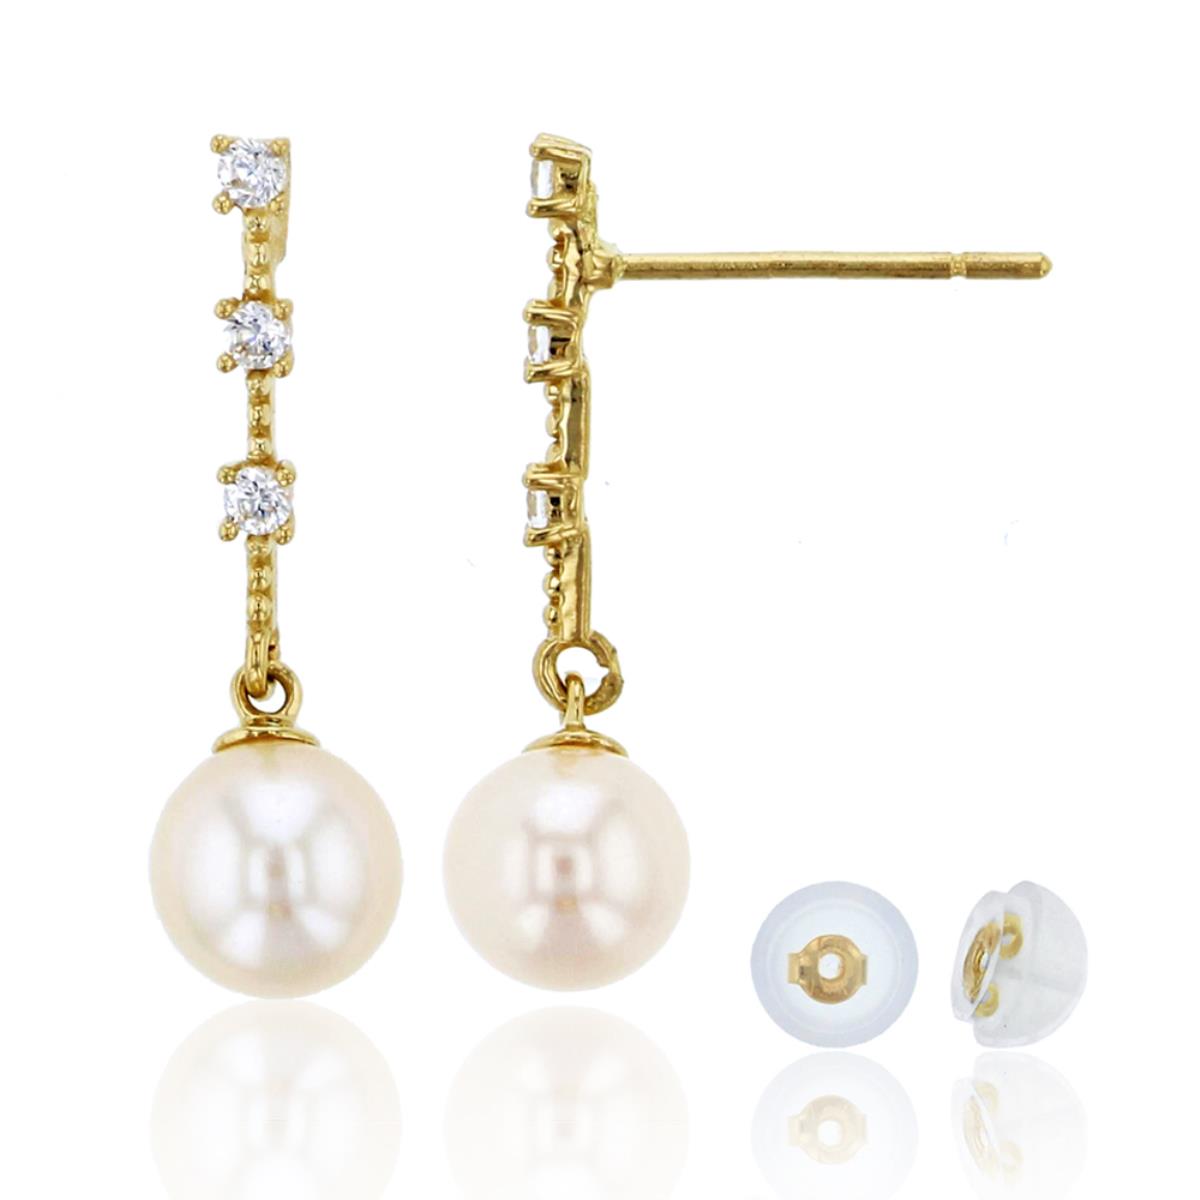 10K Yellow Gold Pave Dangling 5mm Fresh Water Pearl Drop Earring & 10K Silicone Back